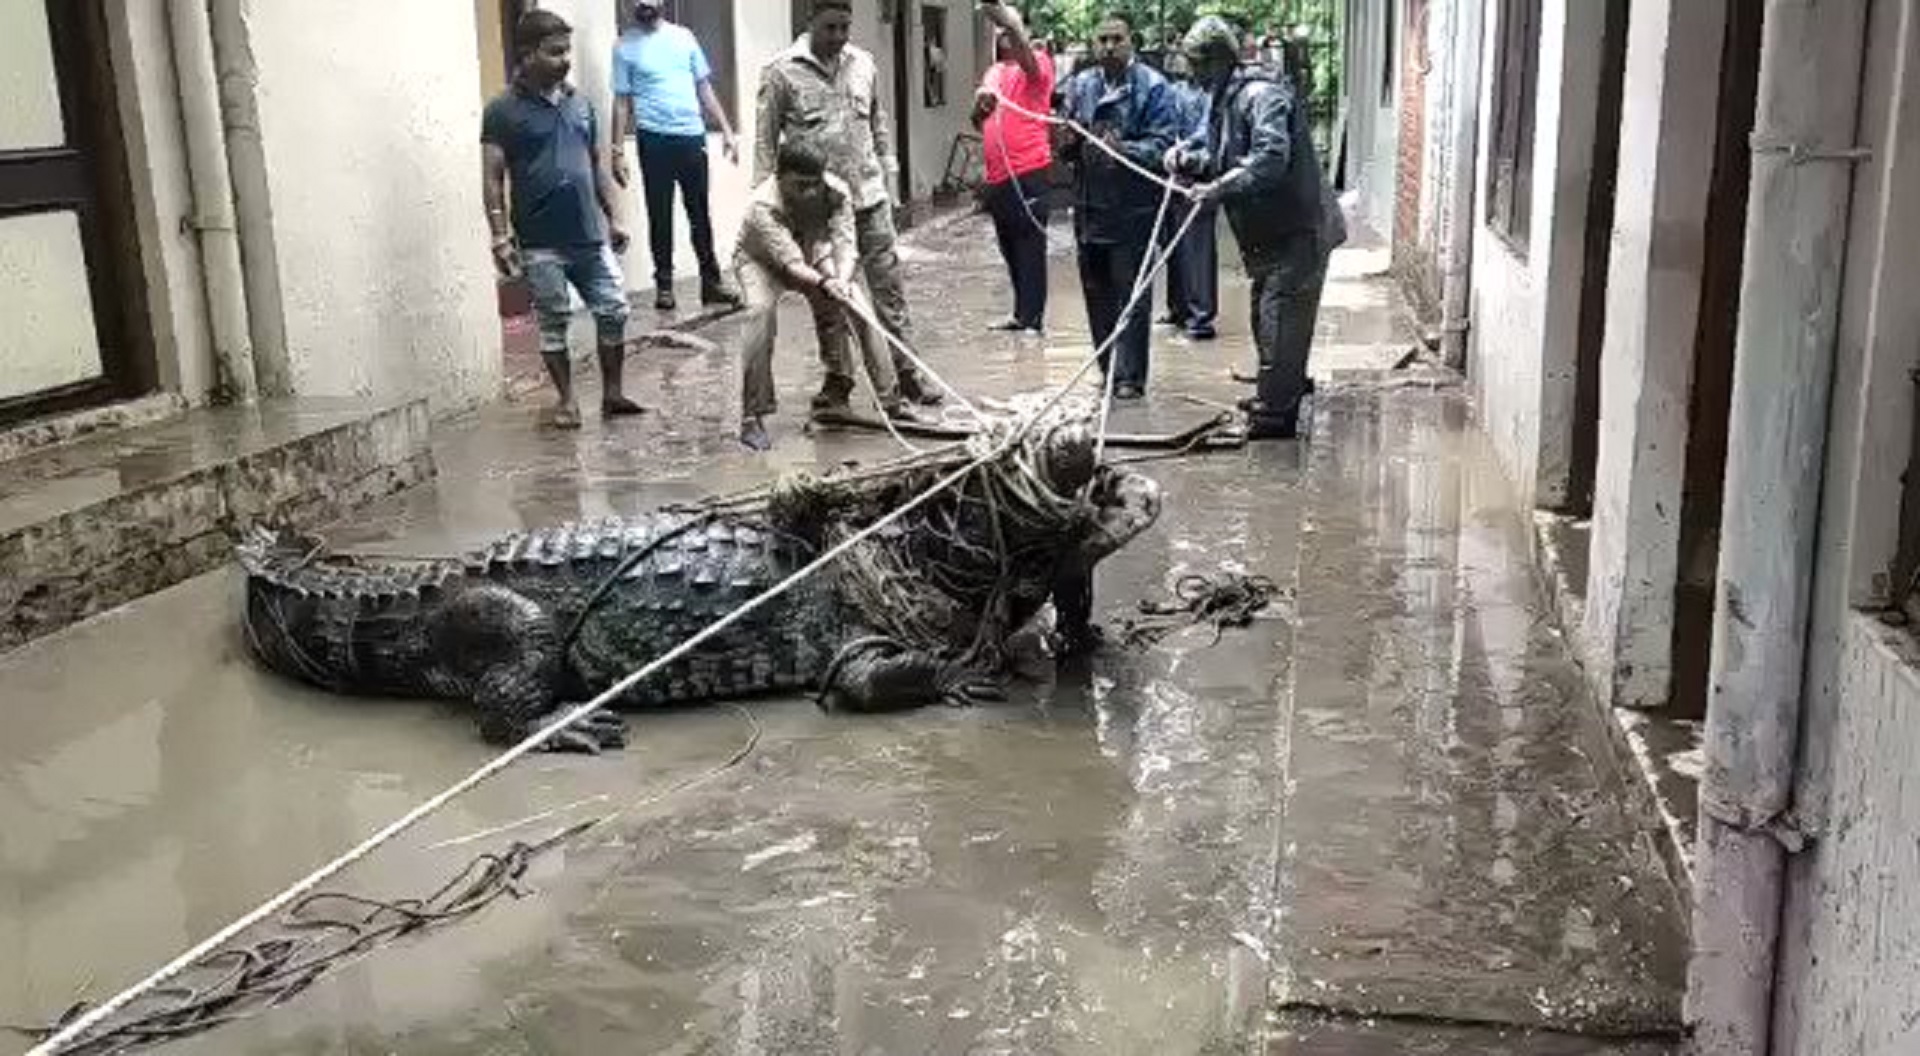 Watch: Massive Crocodile Caught In Residential Area Of UP’s Prayagraj [Shocking Video]